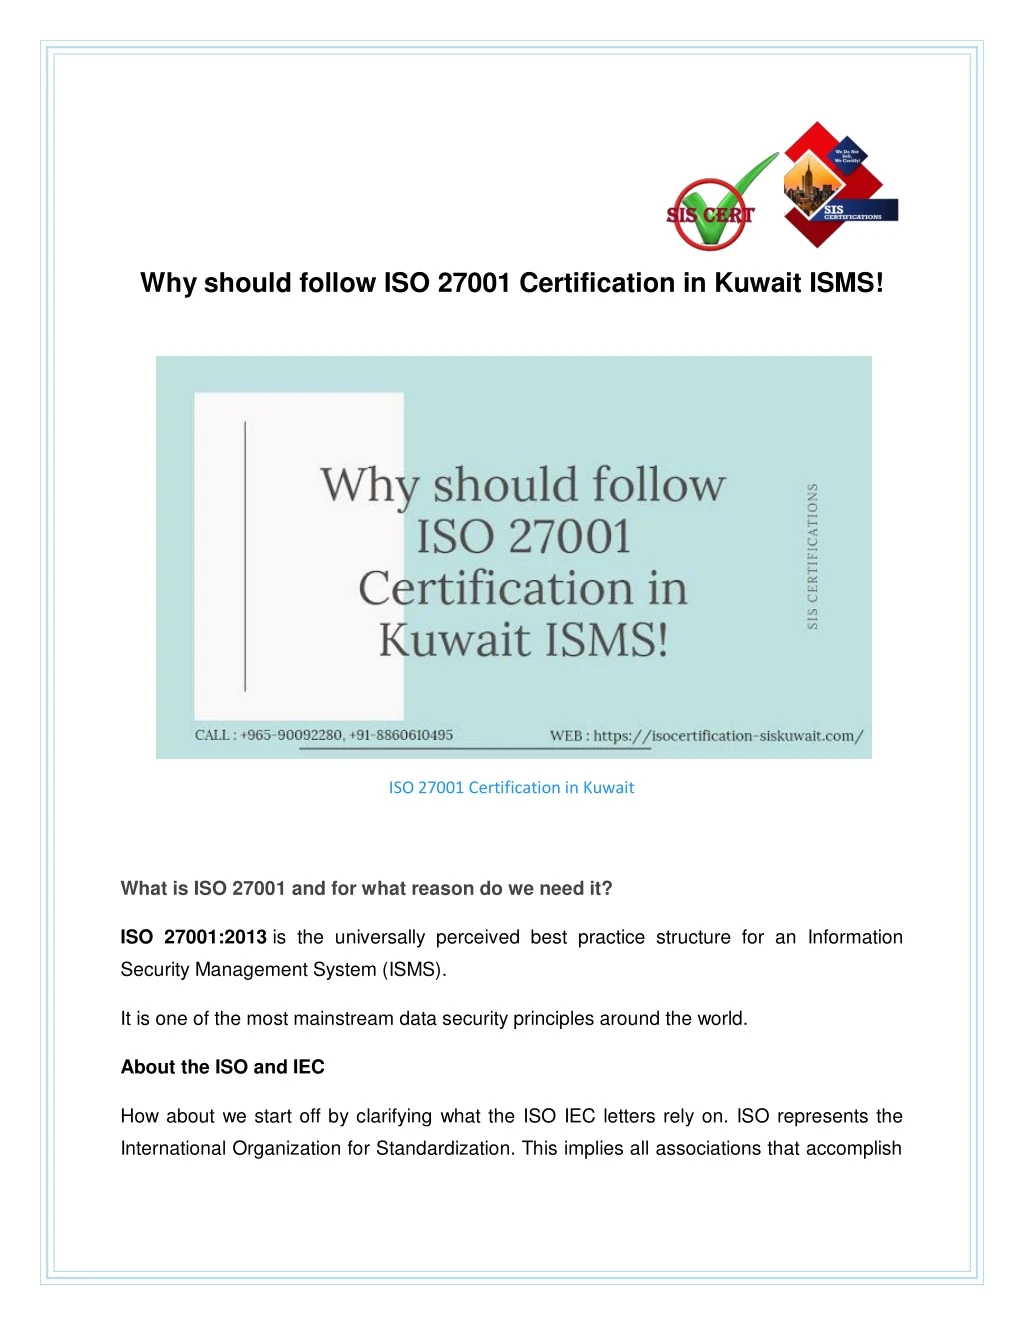 why should follow iso 27001 certification